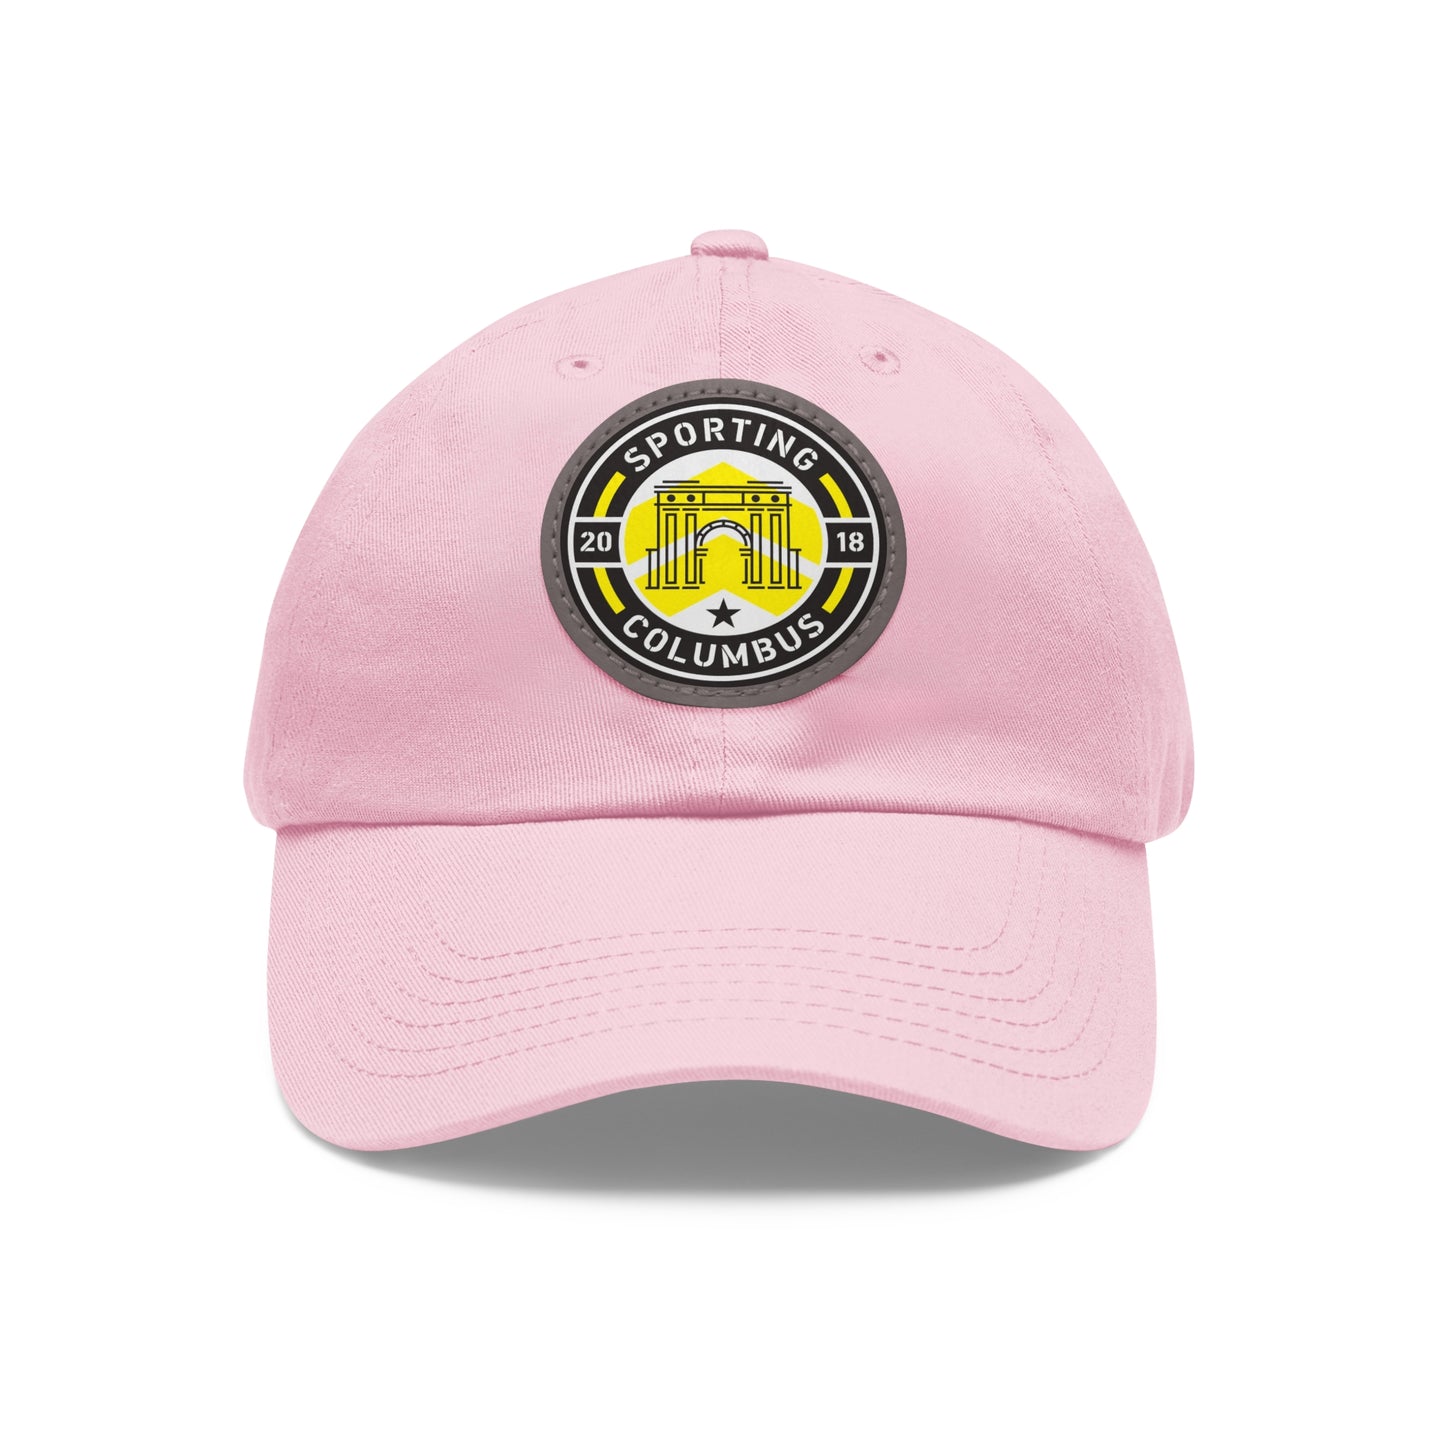 Sporting Columbus Hat with Leather Patch (Round)